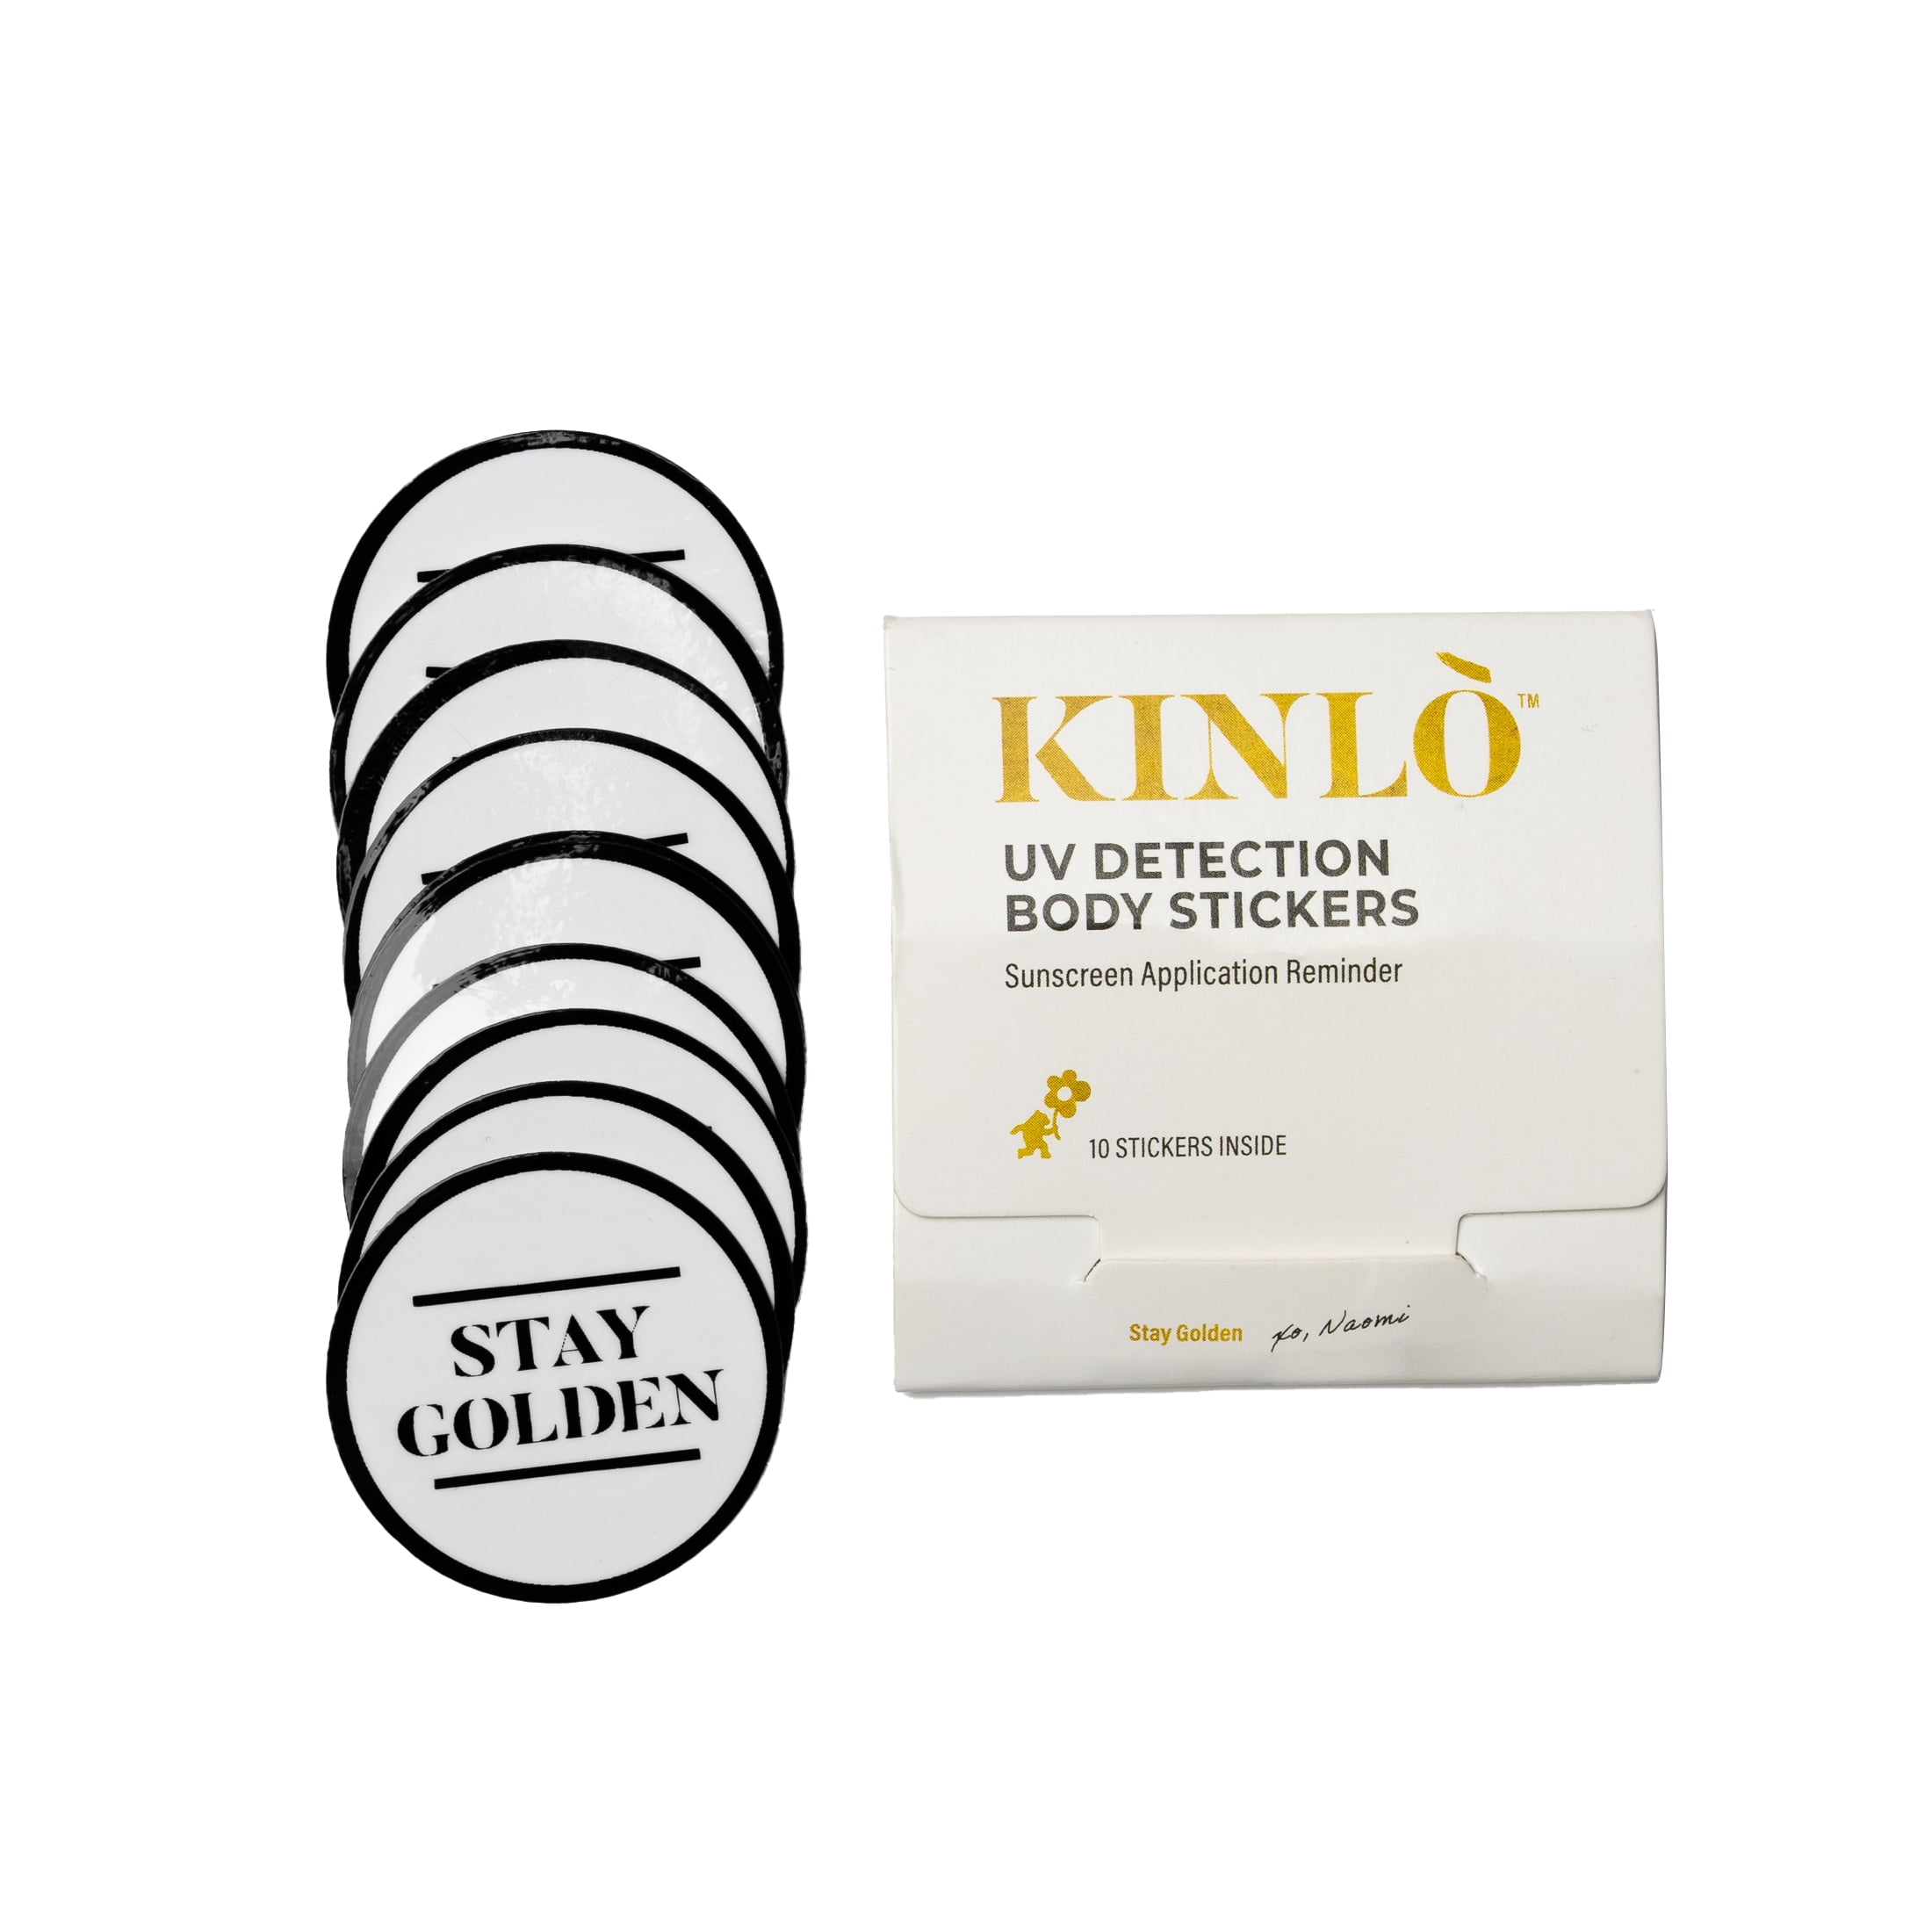 KINLO UV Detection "Stay Golden" Body Stickers 10ct